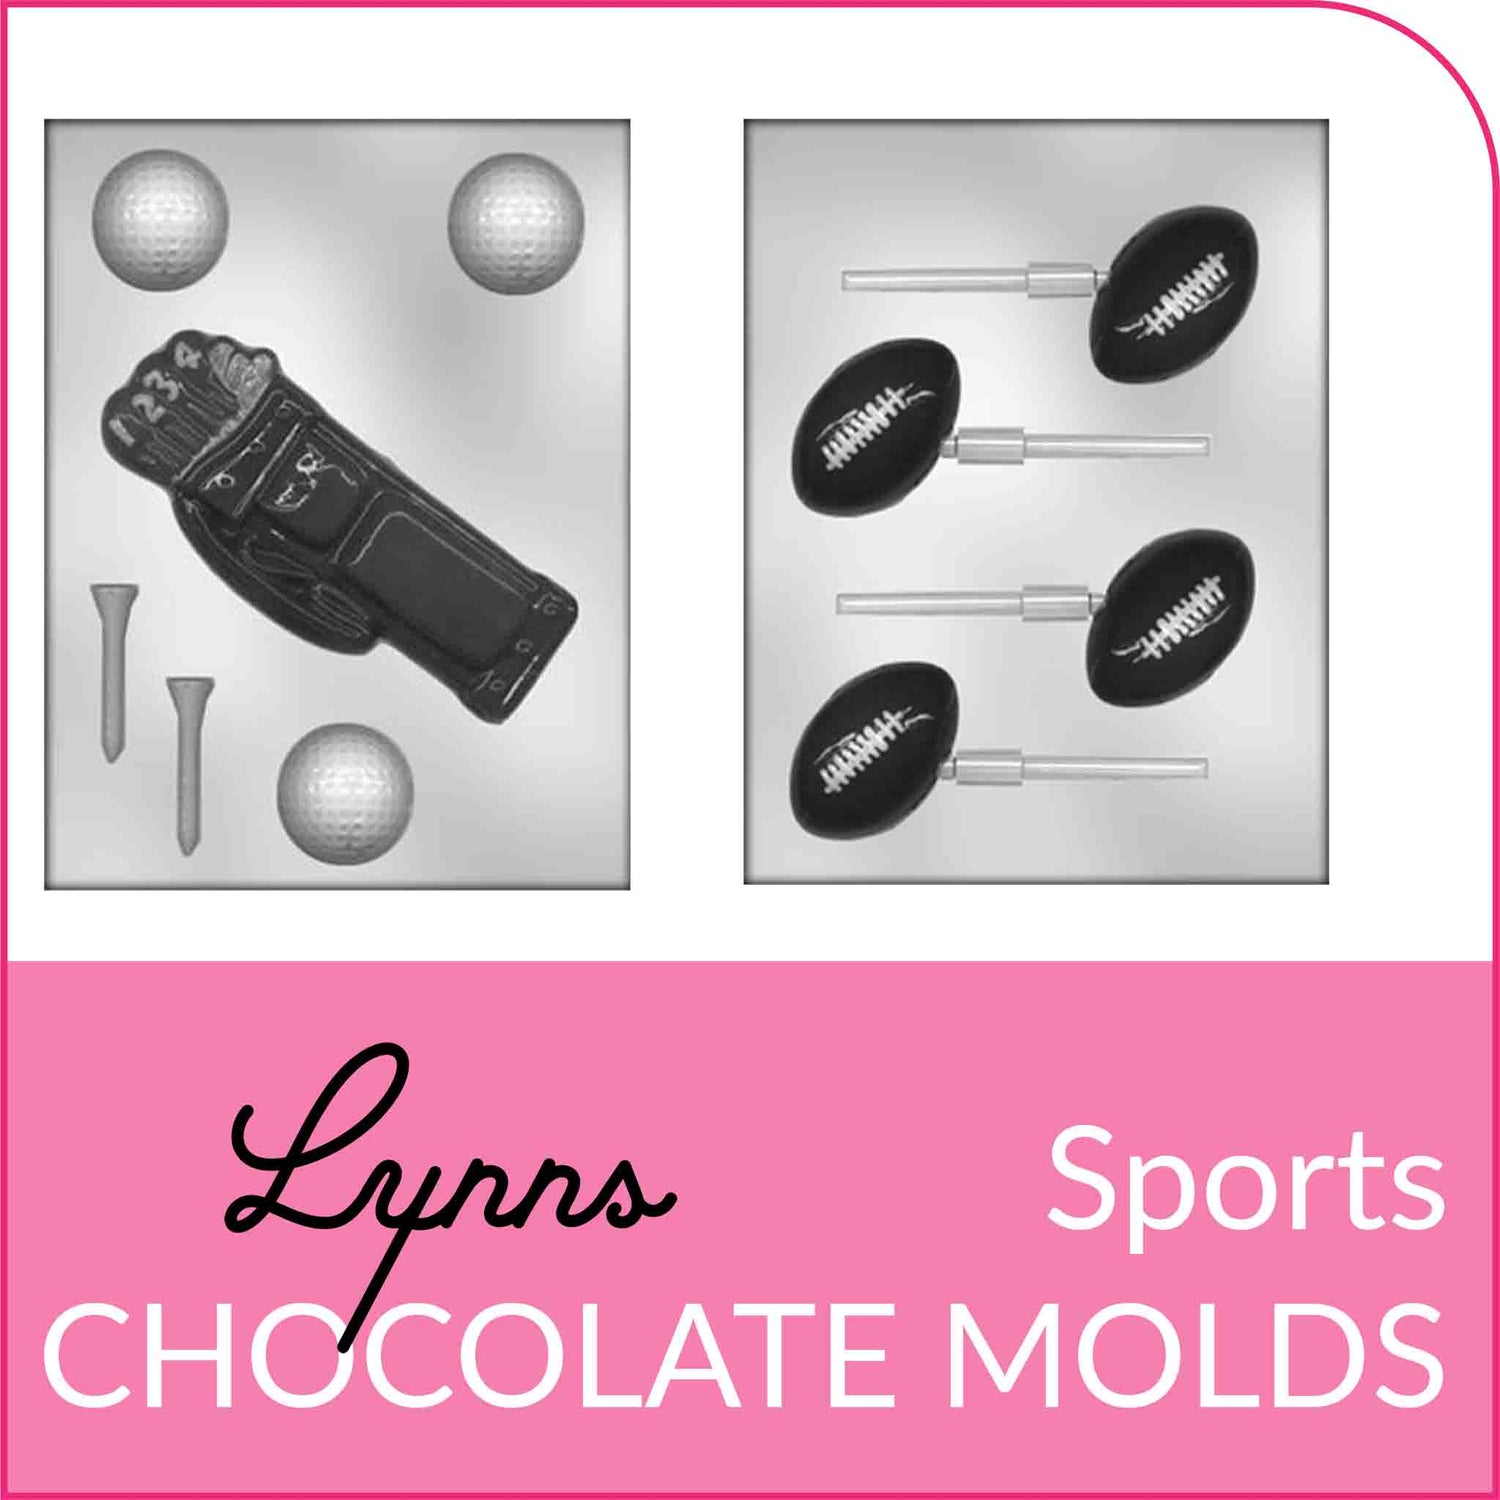 Sports themed Chocolate molds from Lynn's Cake, Candy, and Chocolate Supplies